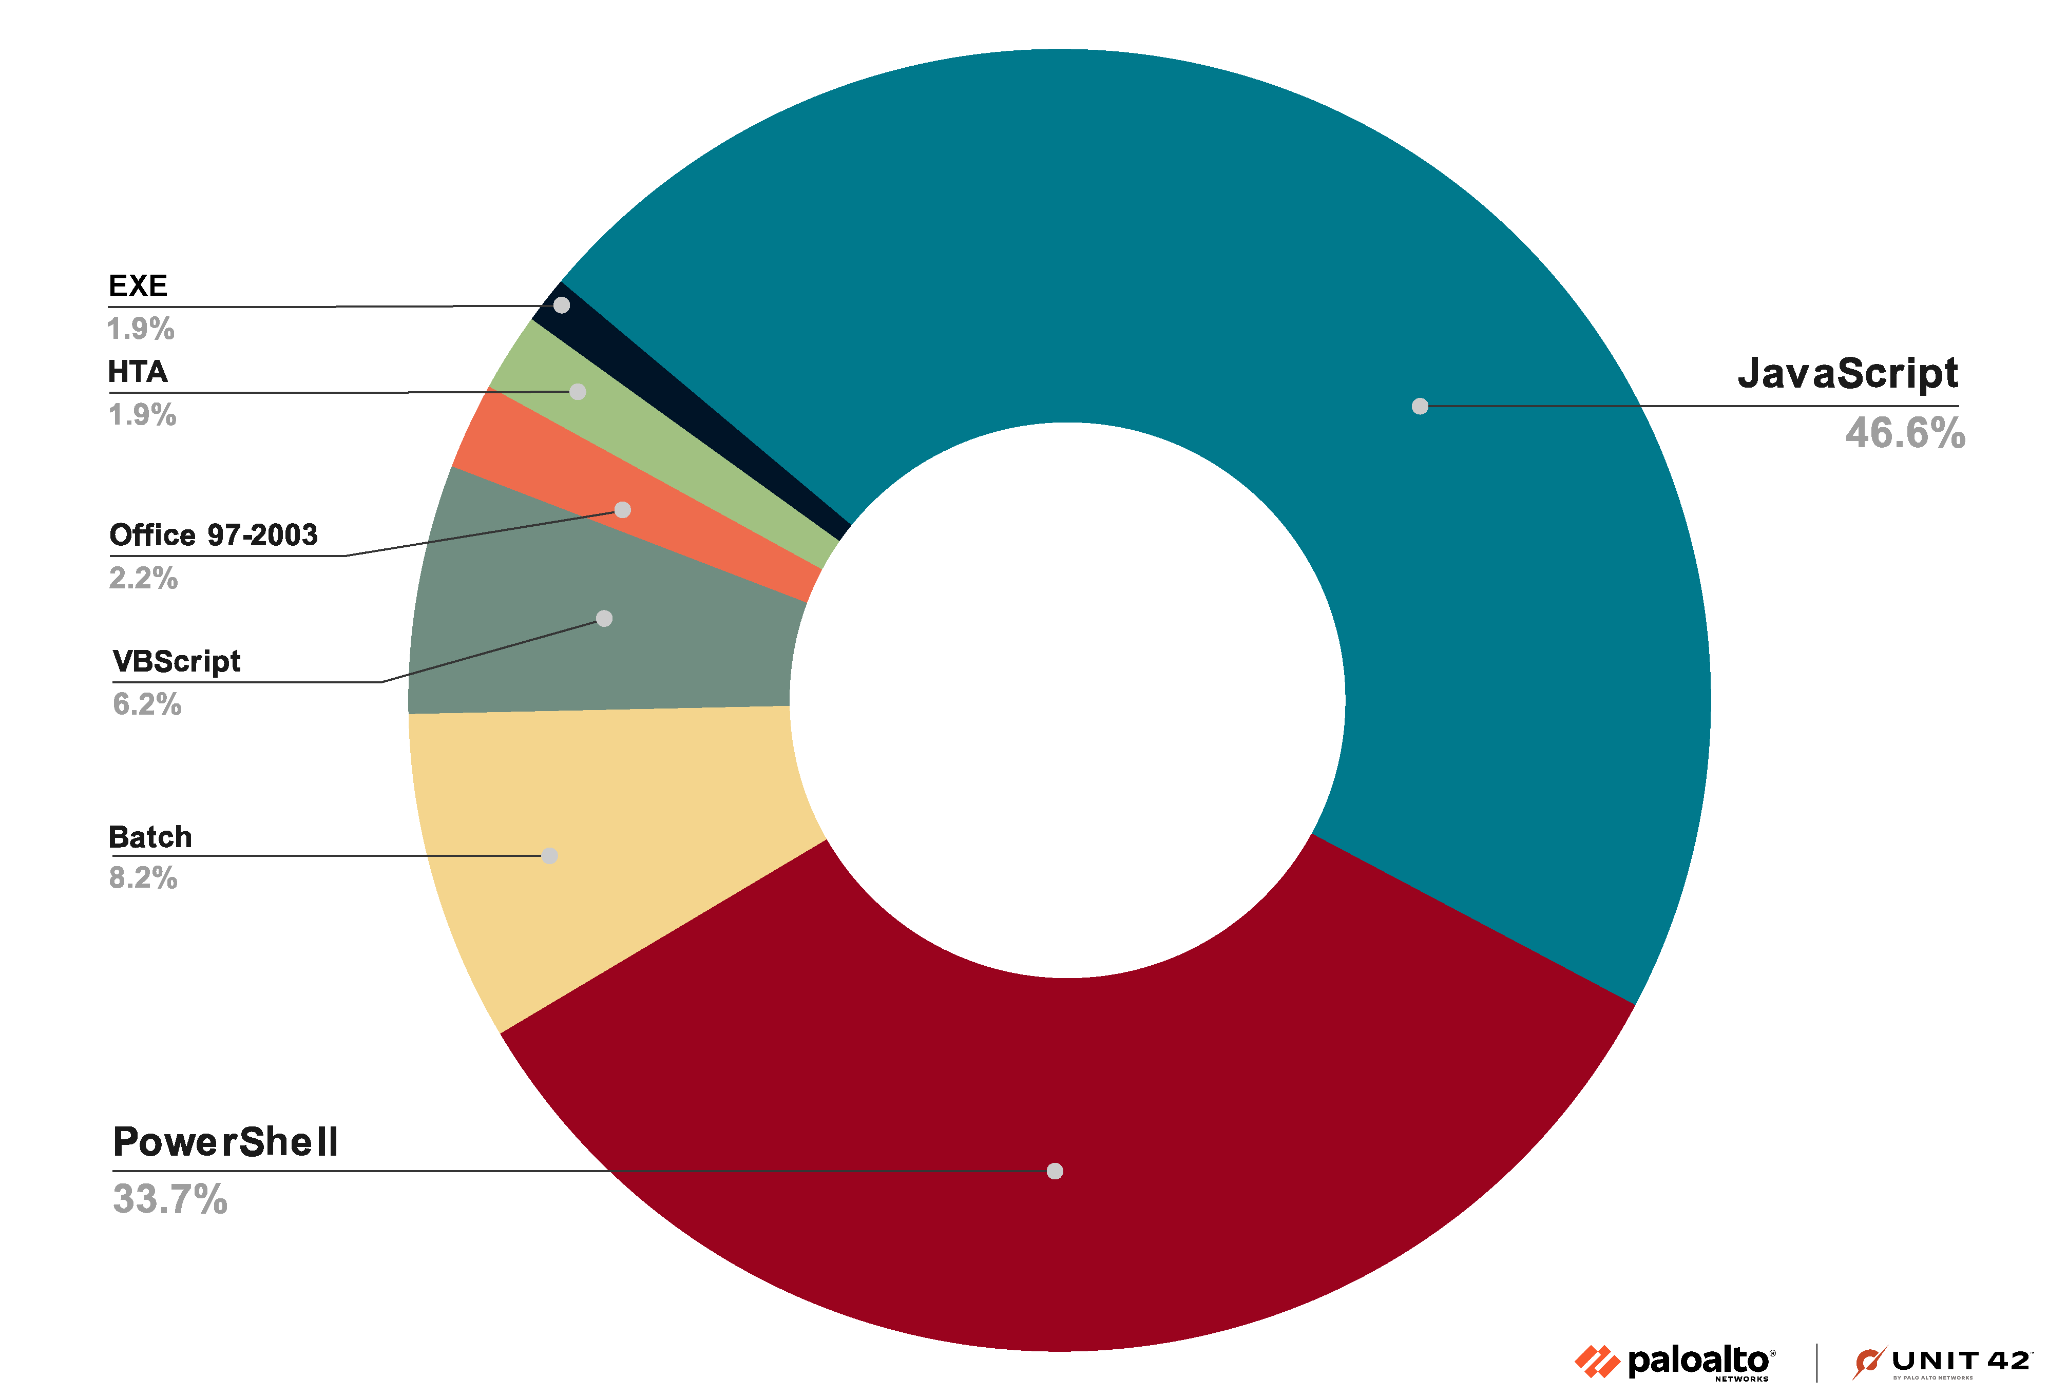 Image 5 is a pie chart of the types of payloads in the malicious files. The largest amount is JavaScript at 46.6%, followed by PowerShell at 33.7%. Next is Batch at 8.2%, followed in increasingly smaller amounts by VBScript, Office 97-2003, HTA and EXE. 